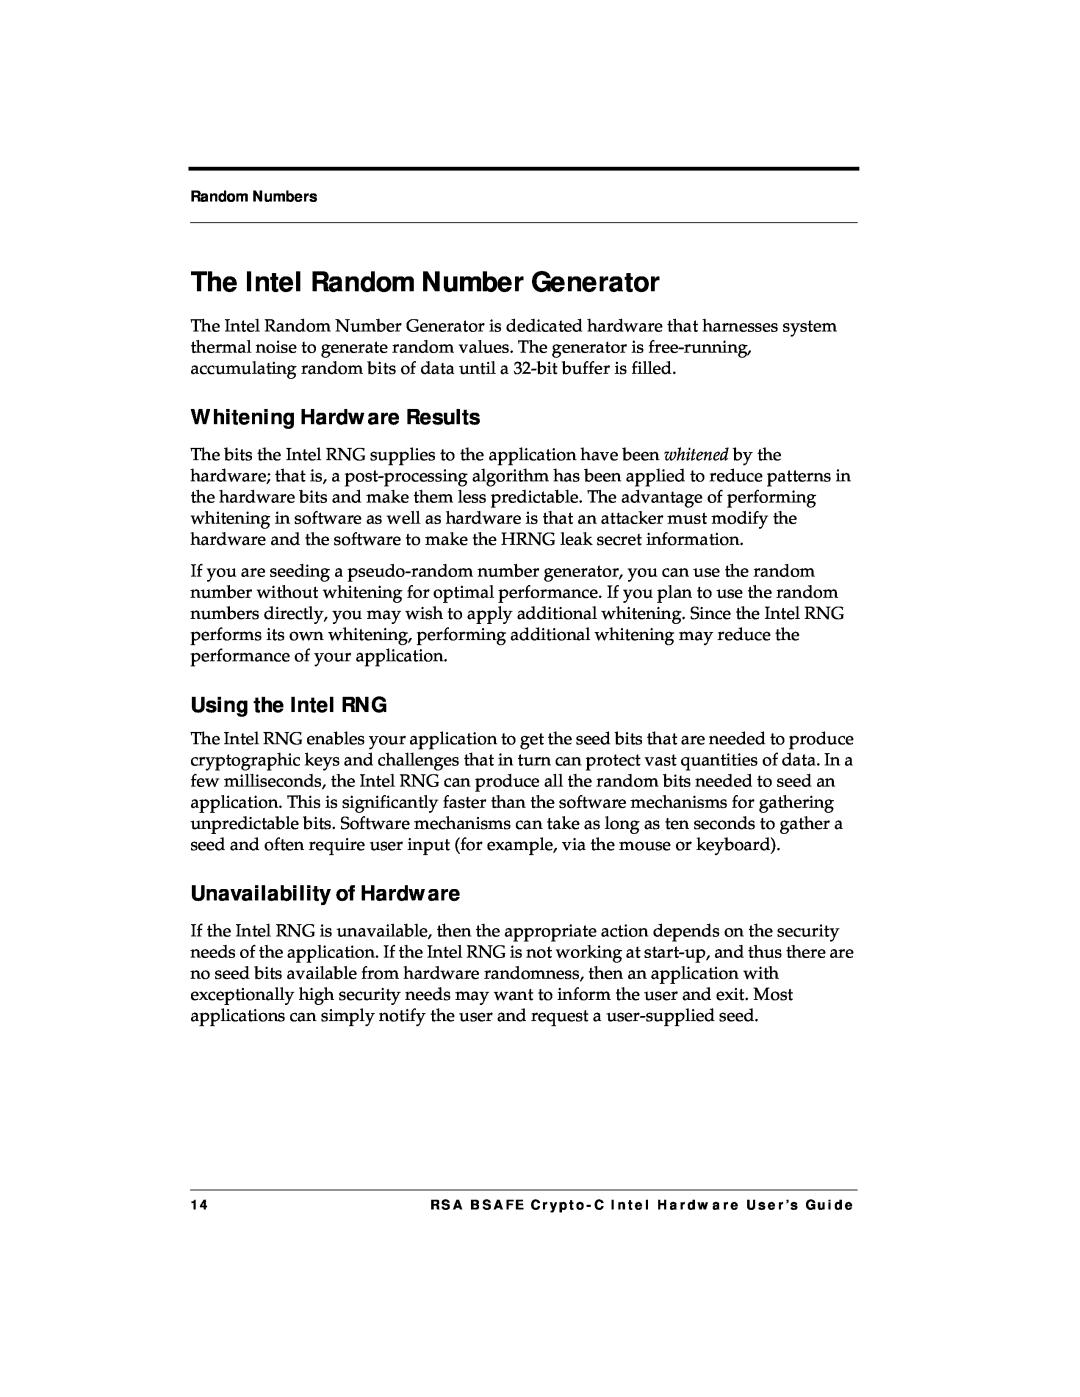 RSA Security 4.3 manual The Intel Random Number Generator, Whitening Hardware Results, Using the Intel RNG, Random Numbers 